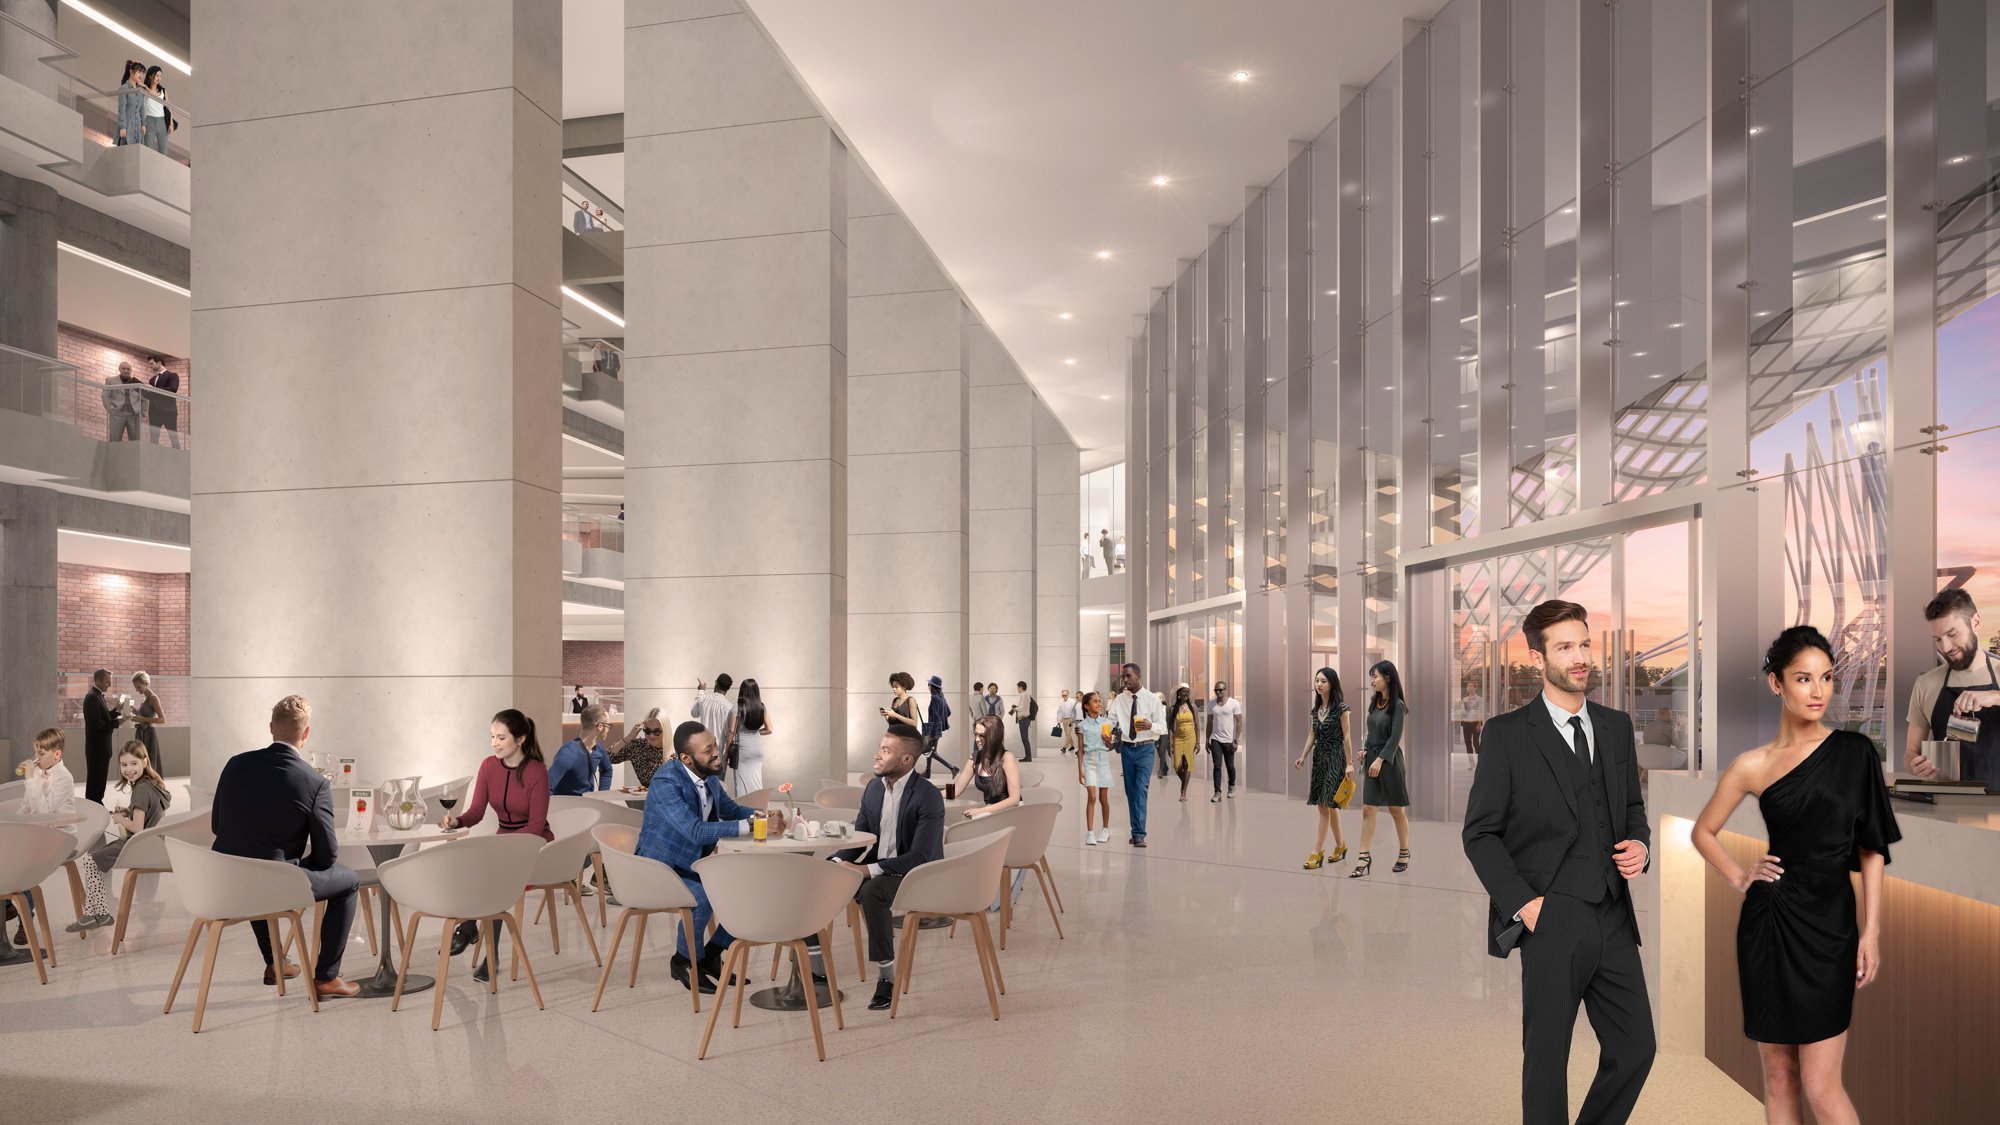 An artist's rendering of the proposed makeover of the Straz Center lobby. (Courtesy photo)